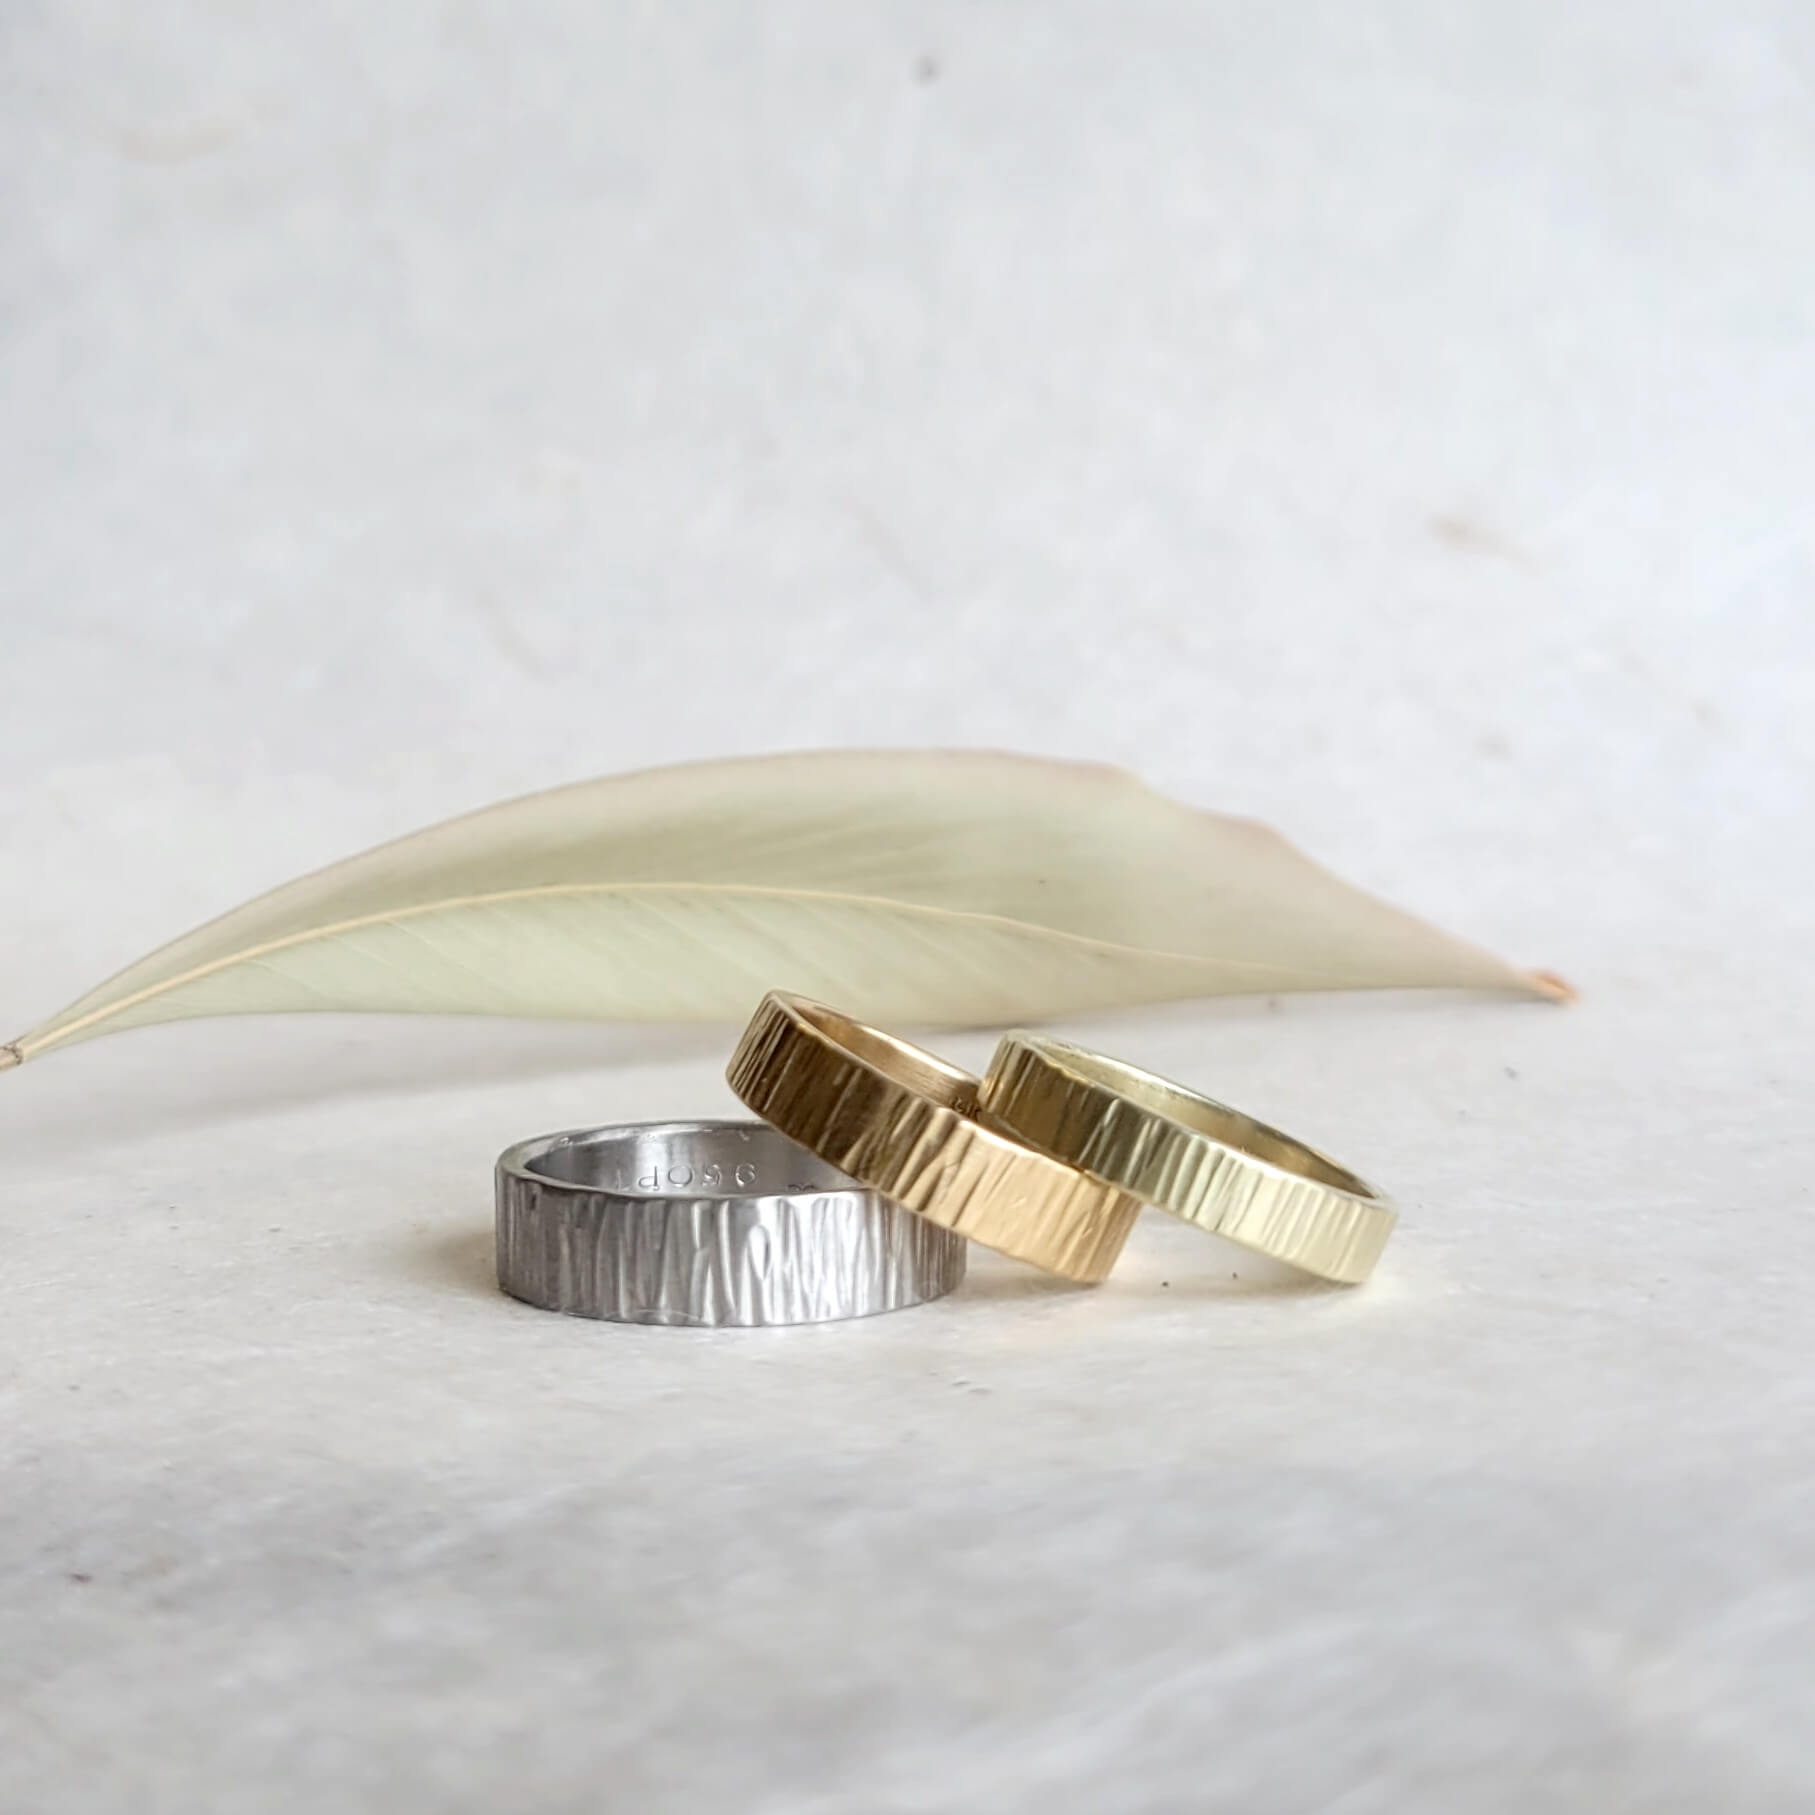 Linear hammered 14k yellow gold wedding band. Handmade by EC Design Jewelry in Minneapolis, MN using recycled metal.